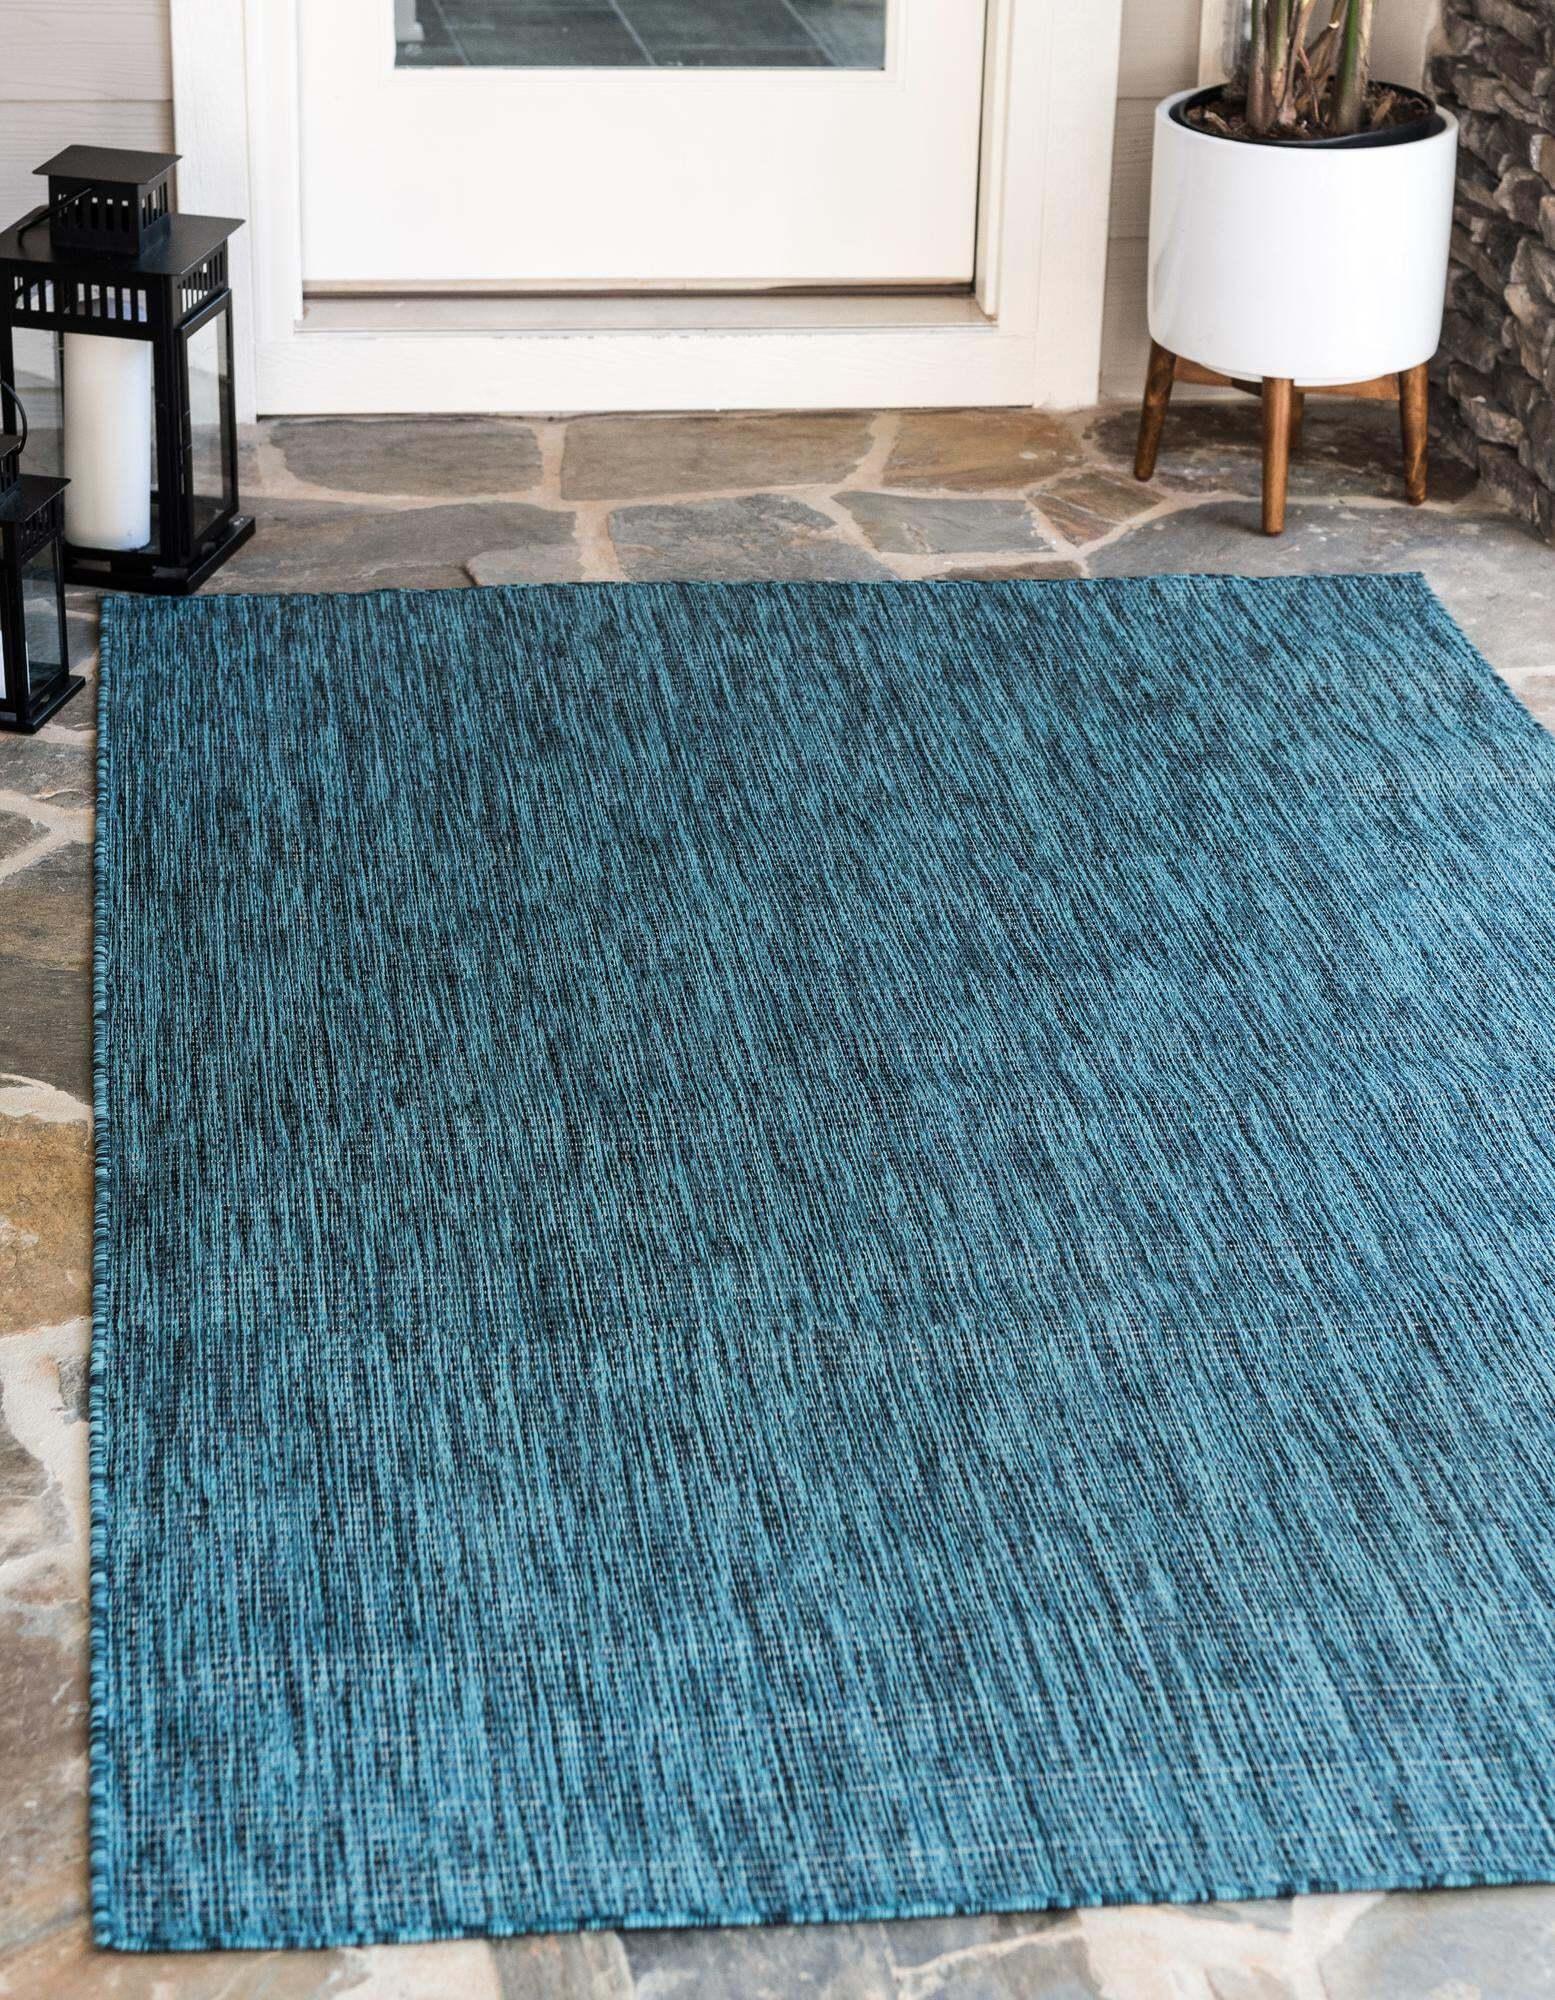 Unique Loom Outdoor Rugs - Outdoor Solid Solid Rectangular 9x12 Rug Teal & Navy Blue